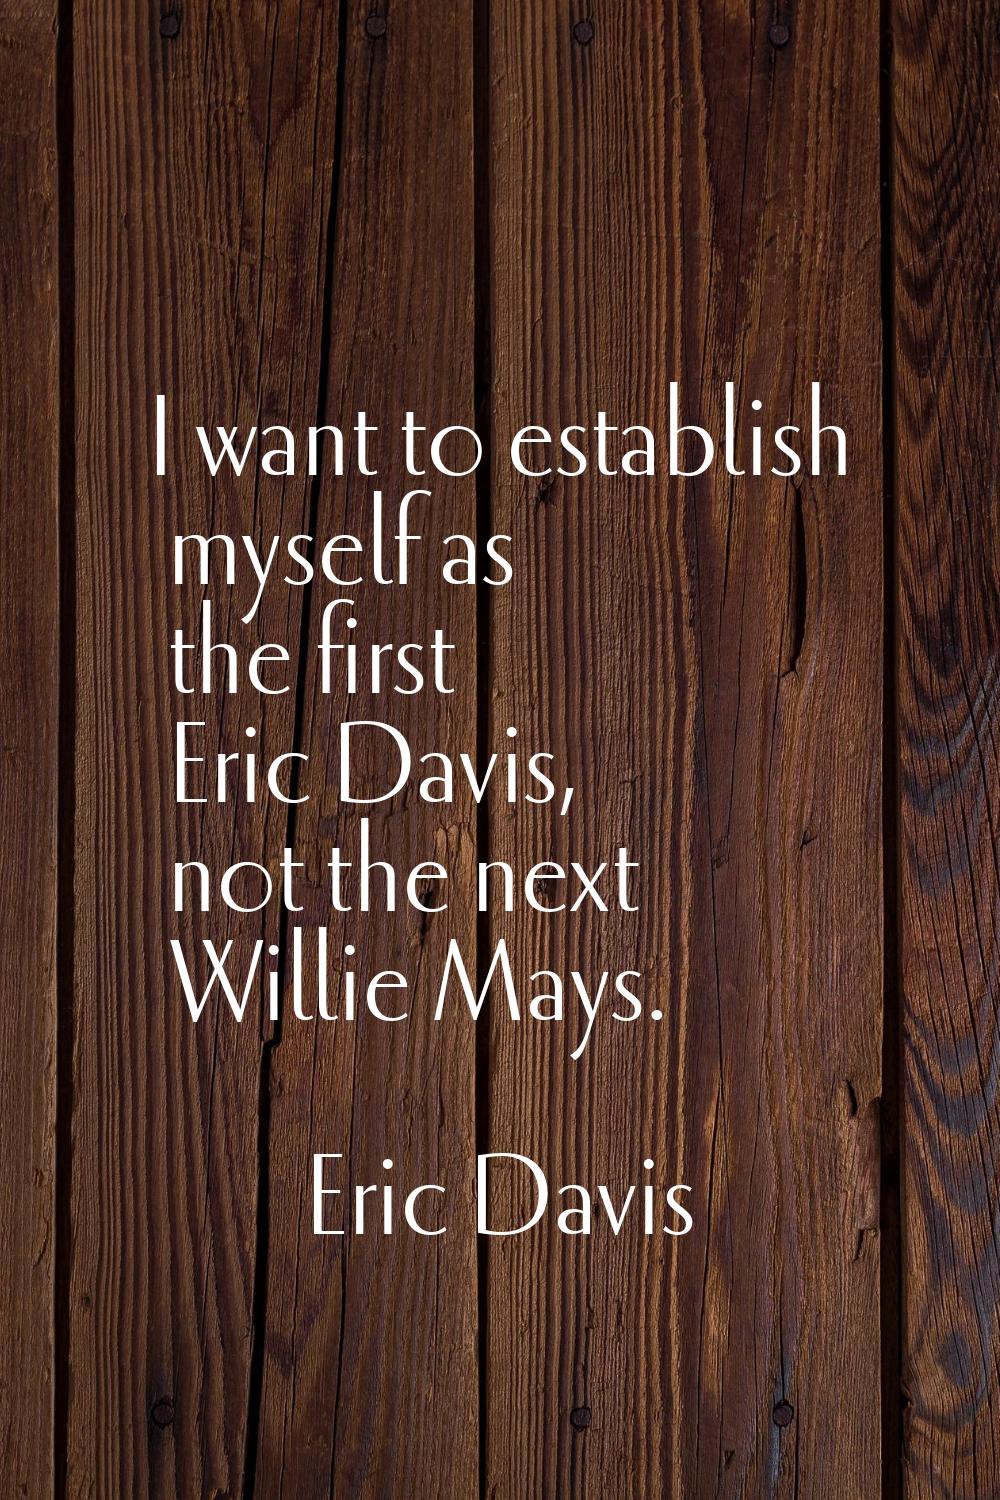 I want to establish myself as the first Eric Davis, not the next Willie Mays.